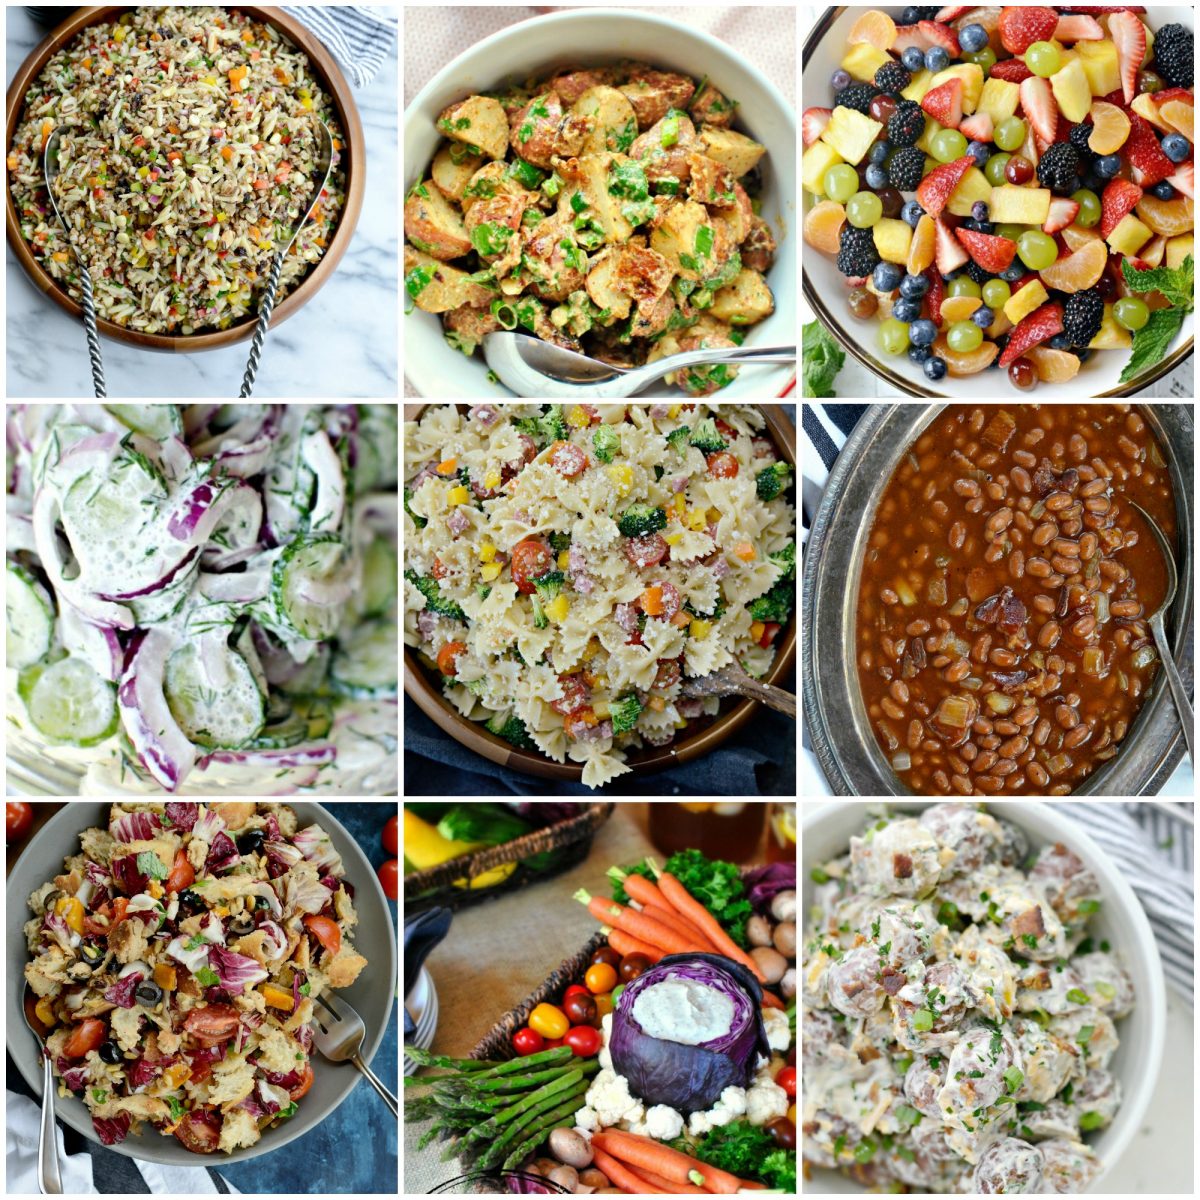 25 Best Salads and Side Dishes To Bring To A Barbecue l SimplyScratch.com